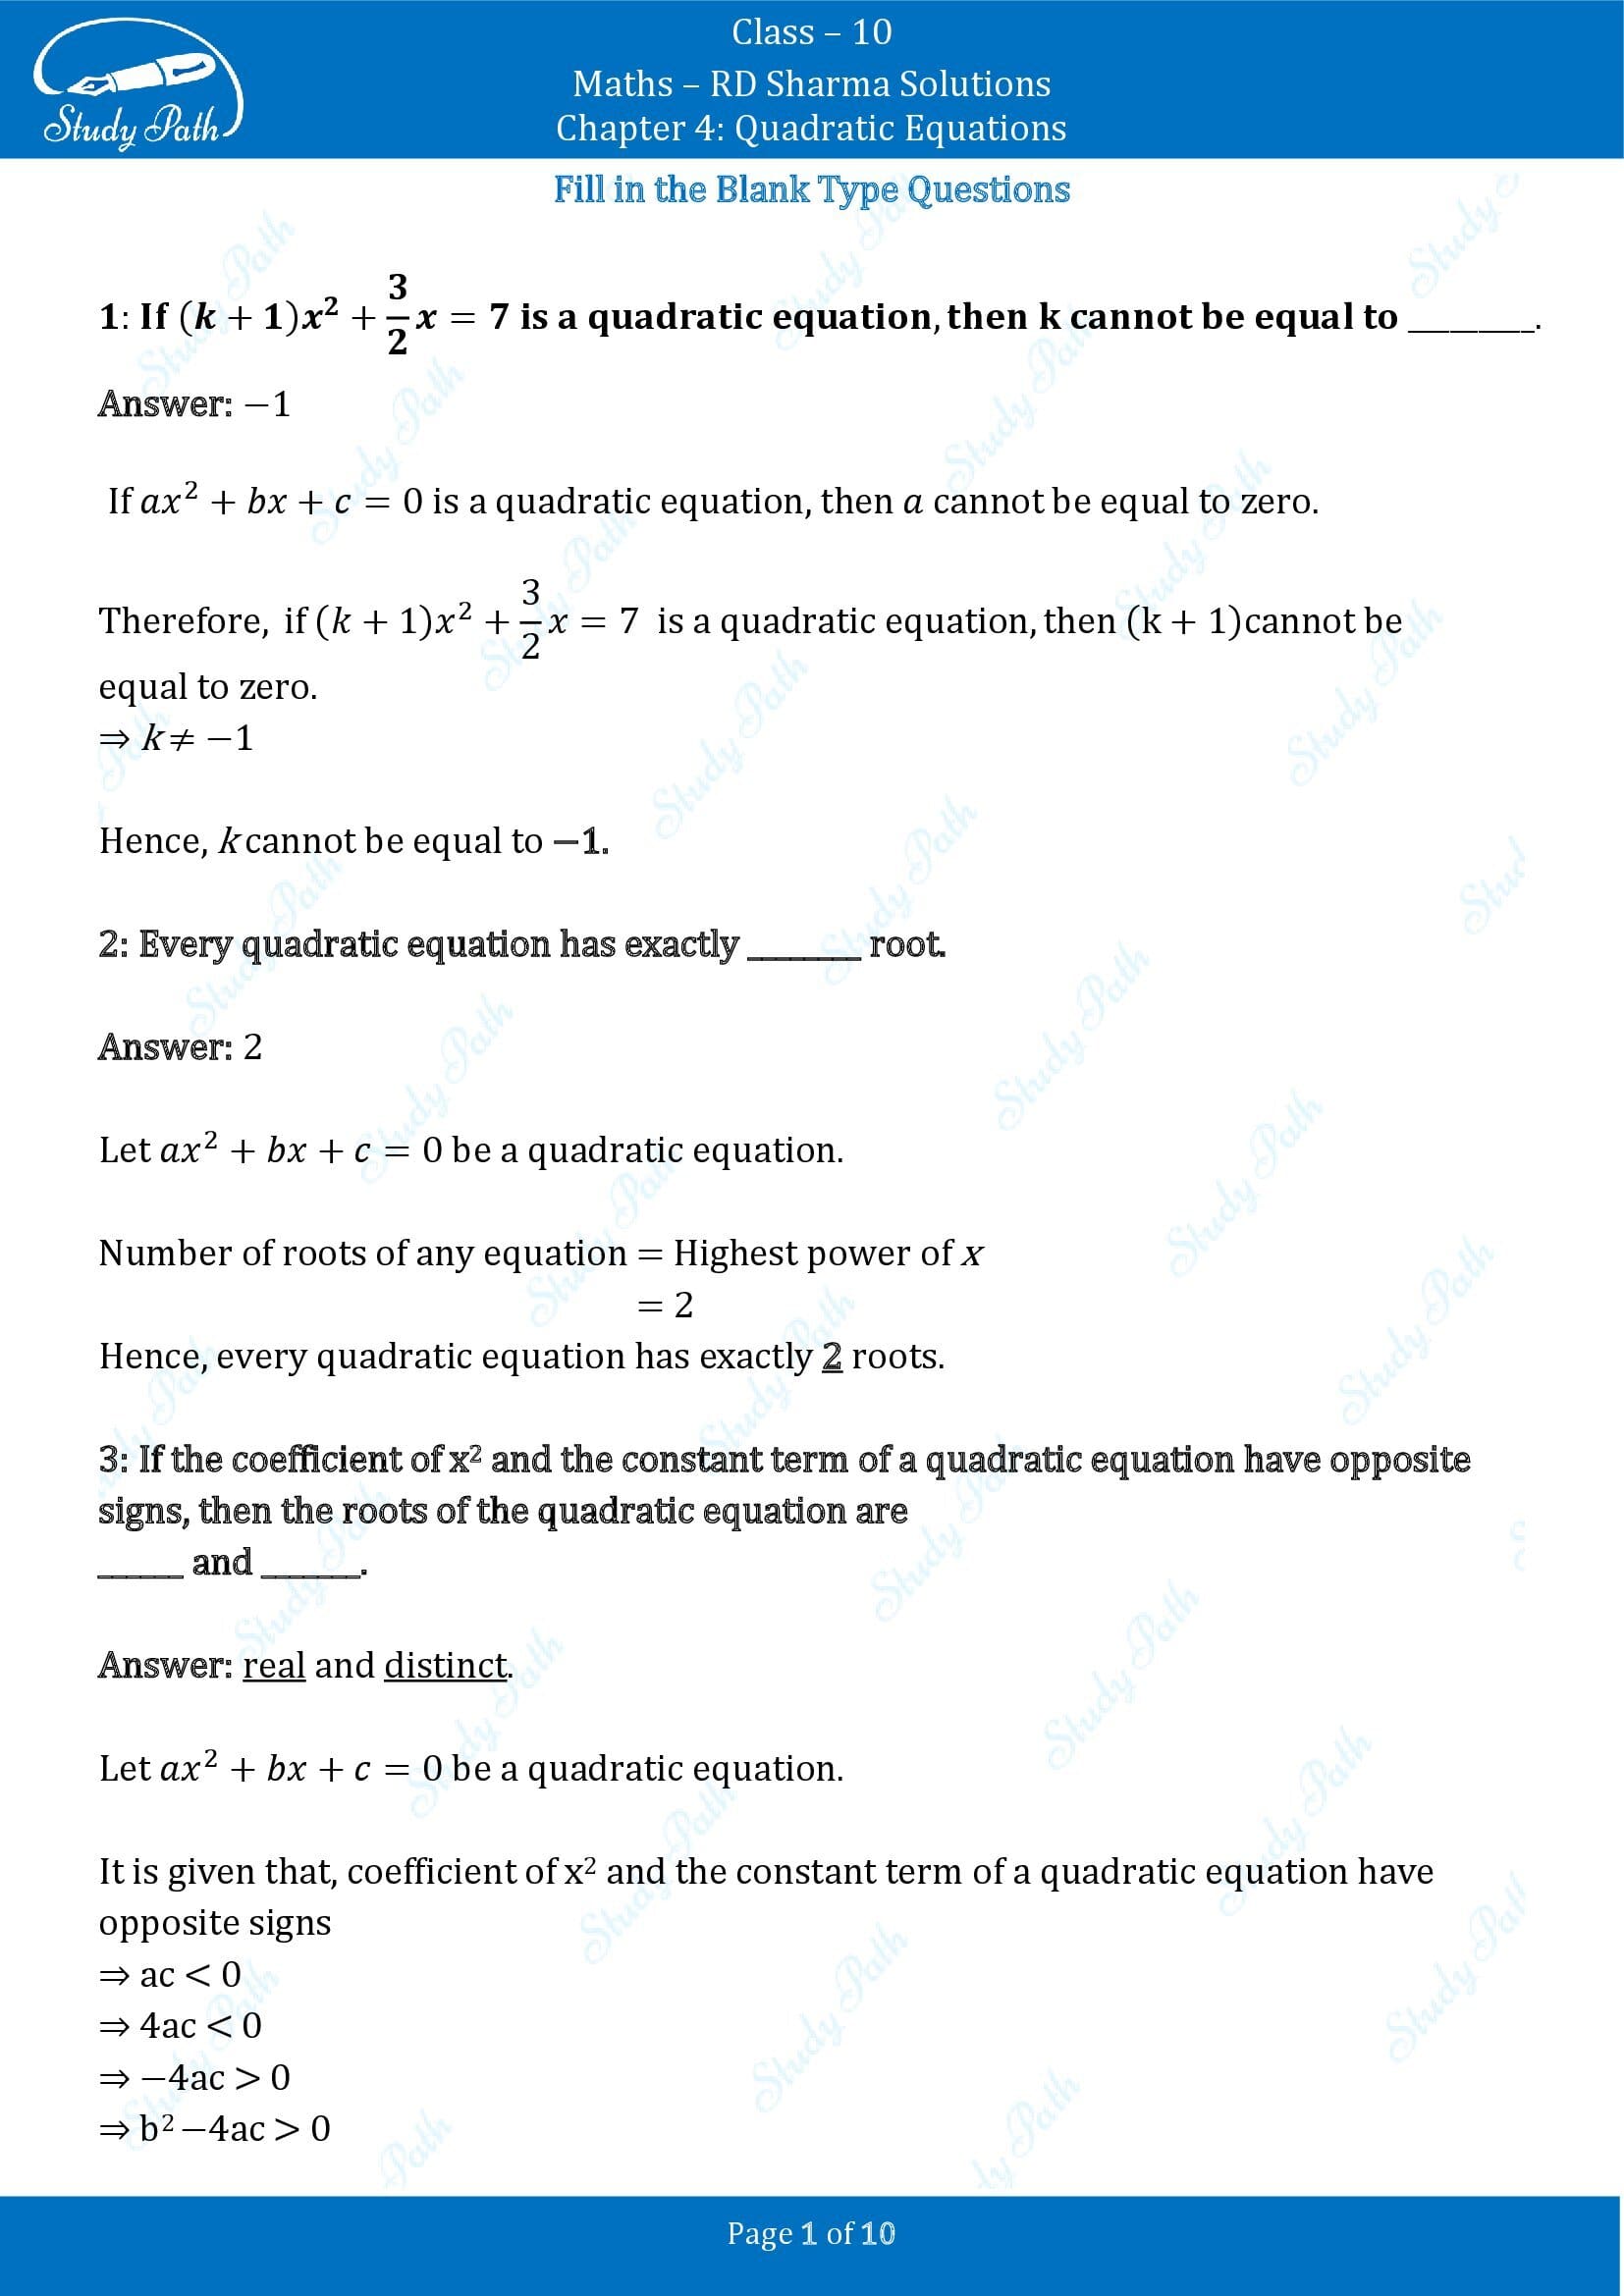 RD Sharma Solutions Class 10 Chapter 4 Quadratic Equations Fill in the Blank Type Questions FBQs 00001